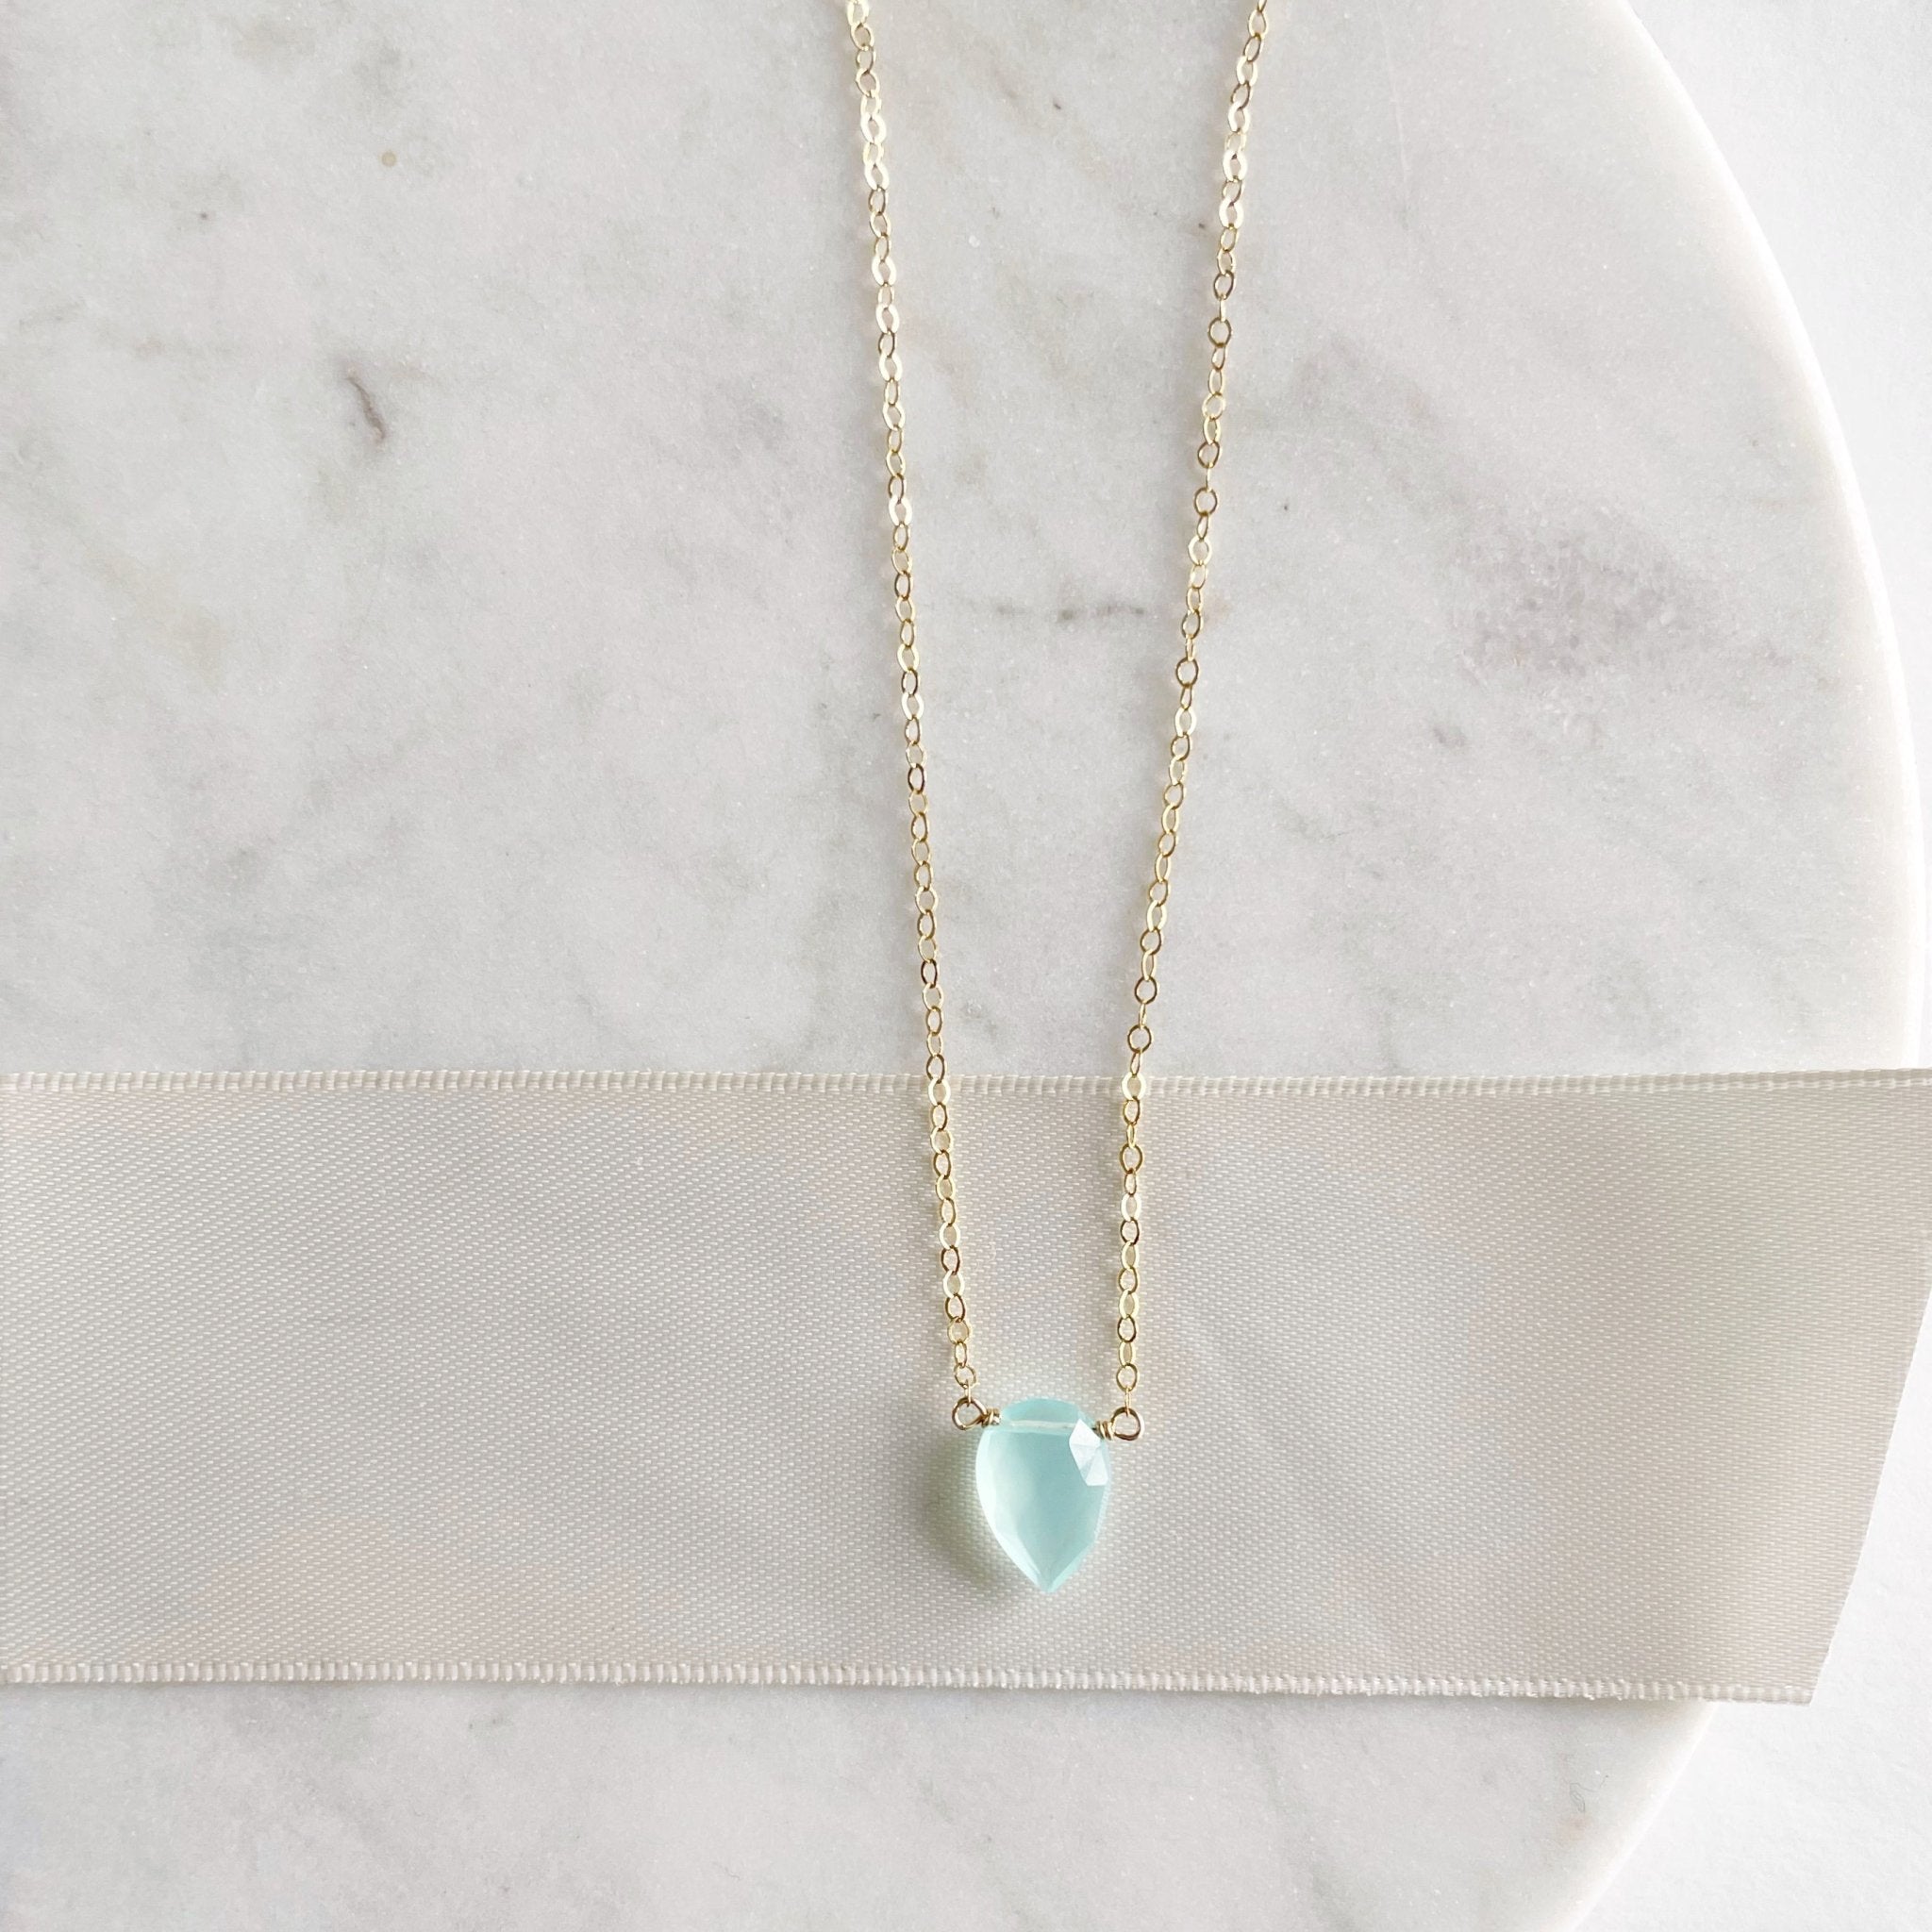 17 inch gold pendant necklace with teardrop shaped aqua chalcedony pendant. Hampton Necklace by Sarah Cornwell Jewelry